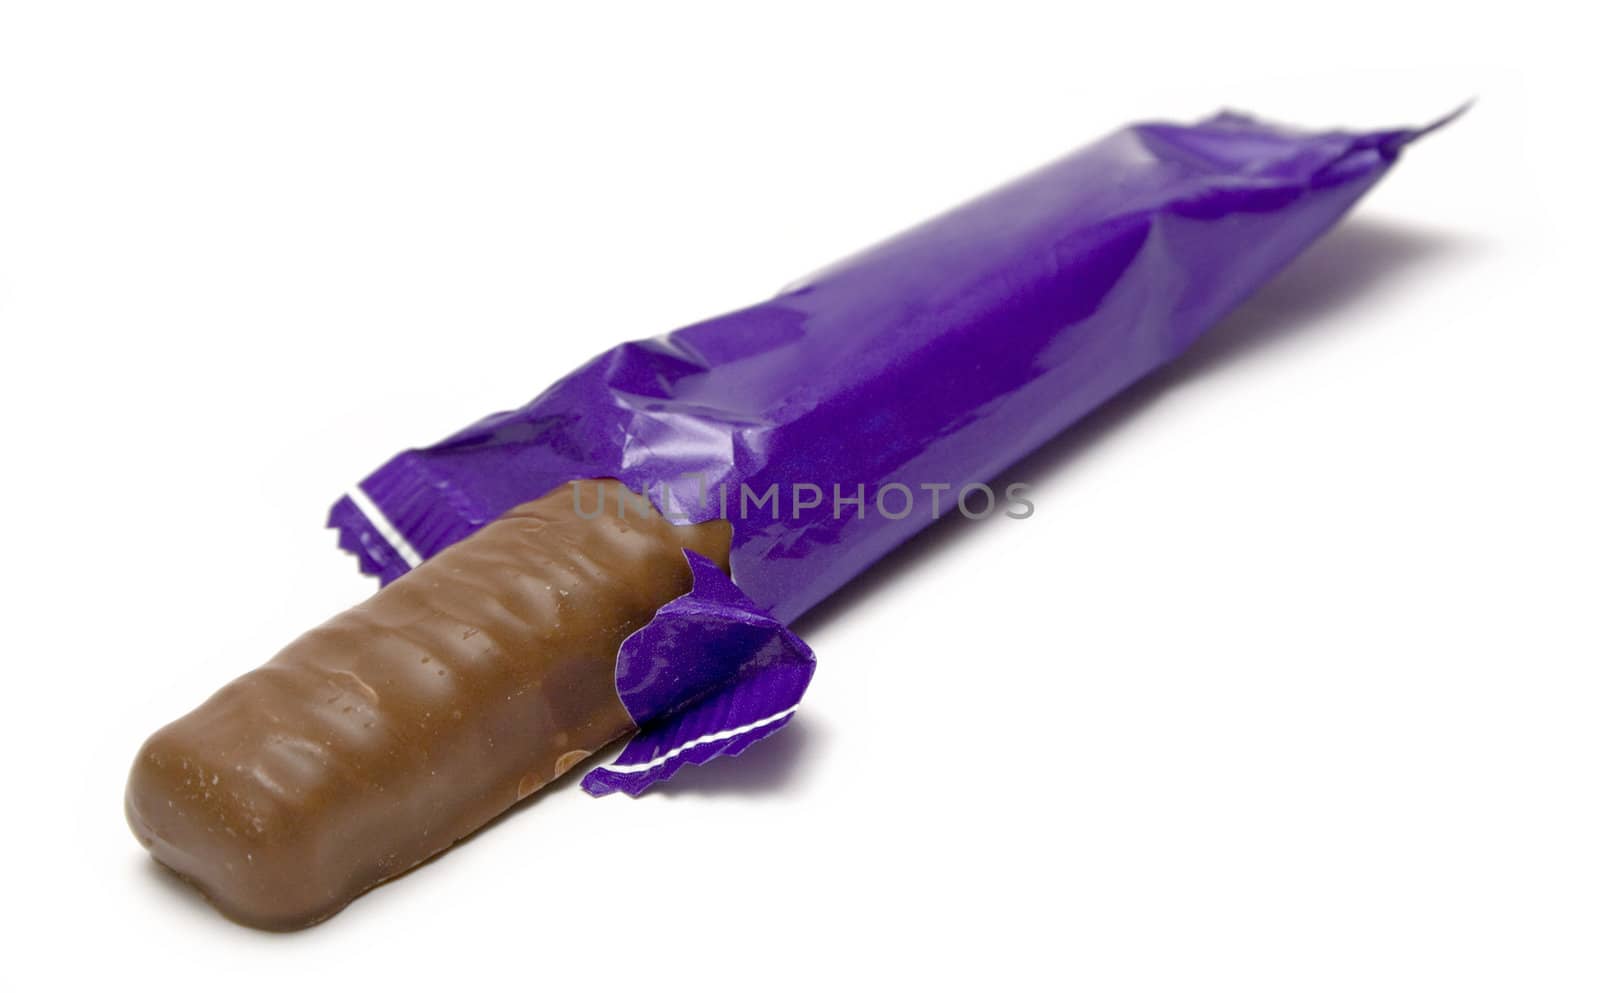 Wrapped chocolate bar isolated on a white background.